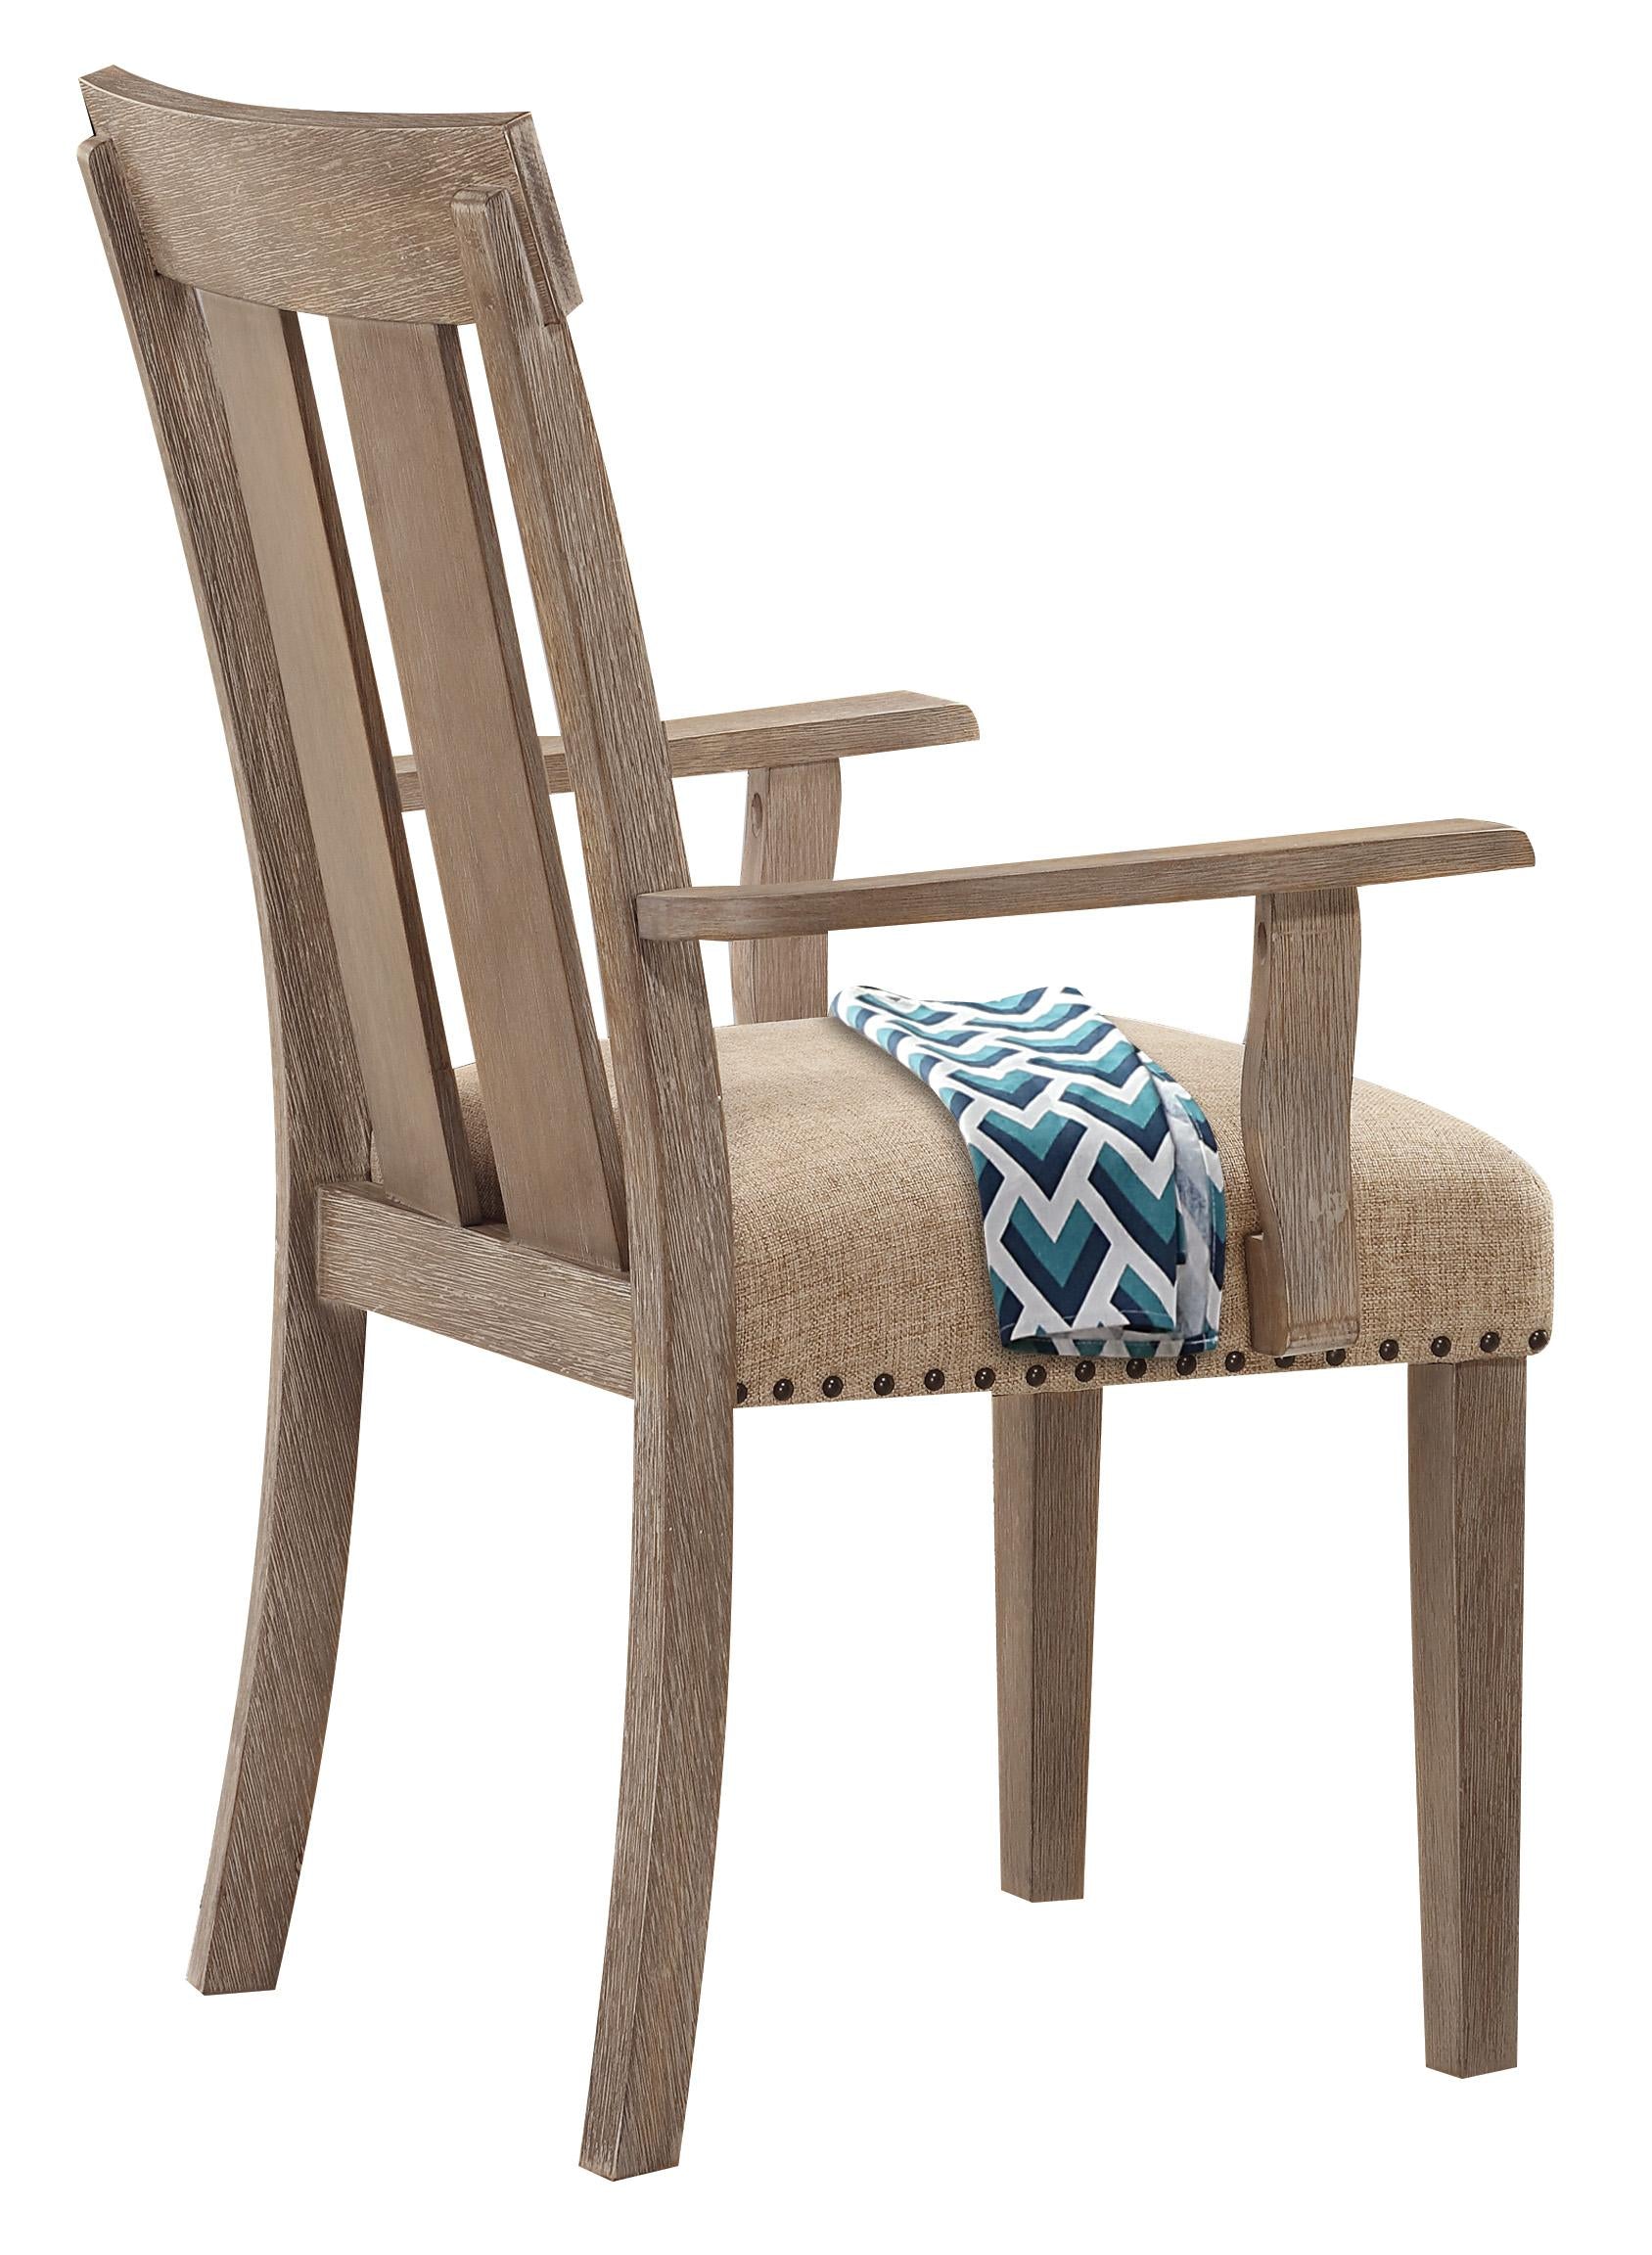 Nathaniel Fabric & Maple Arm Chair , Slatted Back  Half Price Furniture